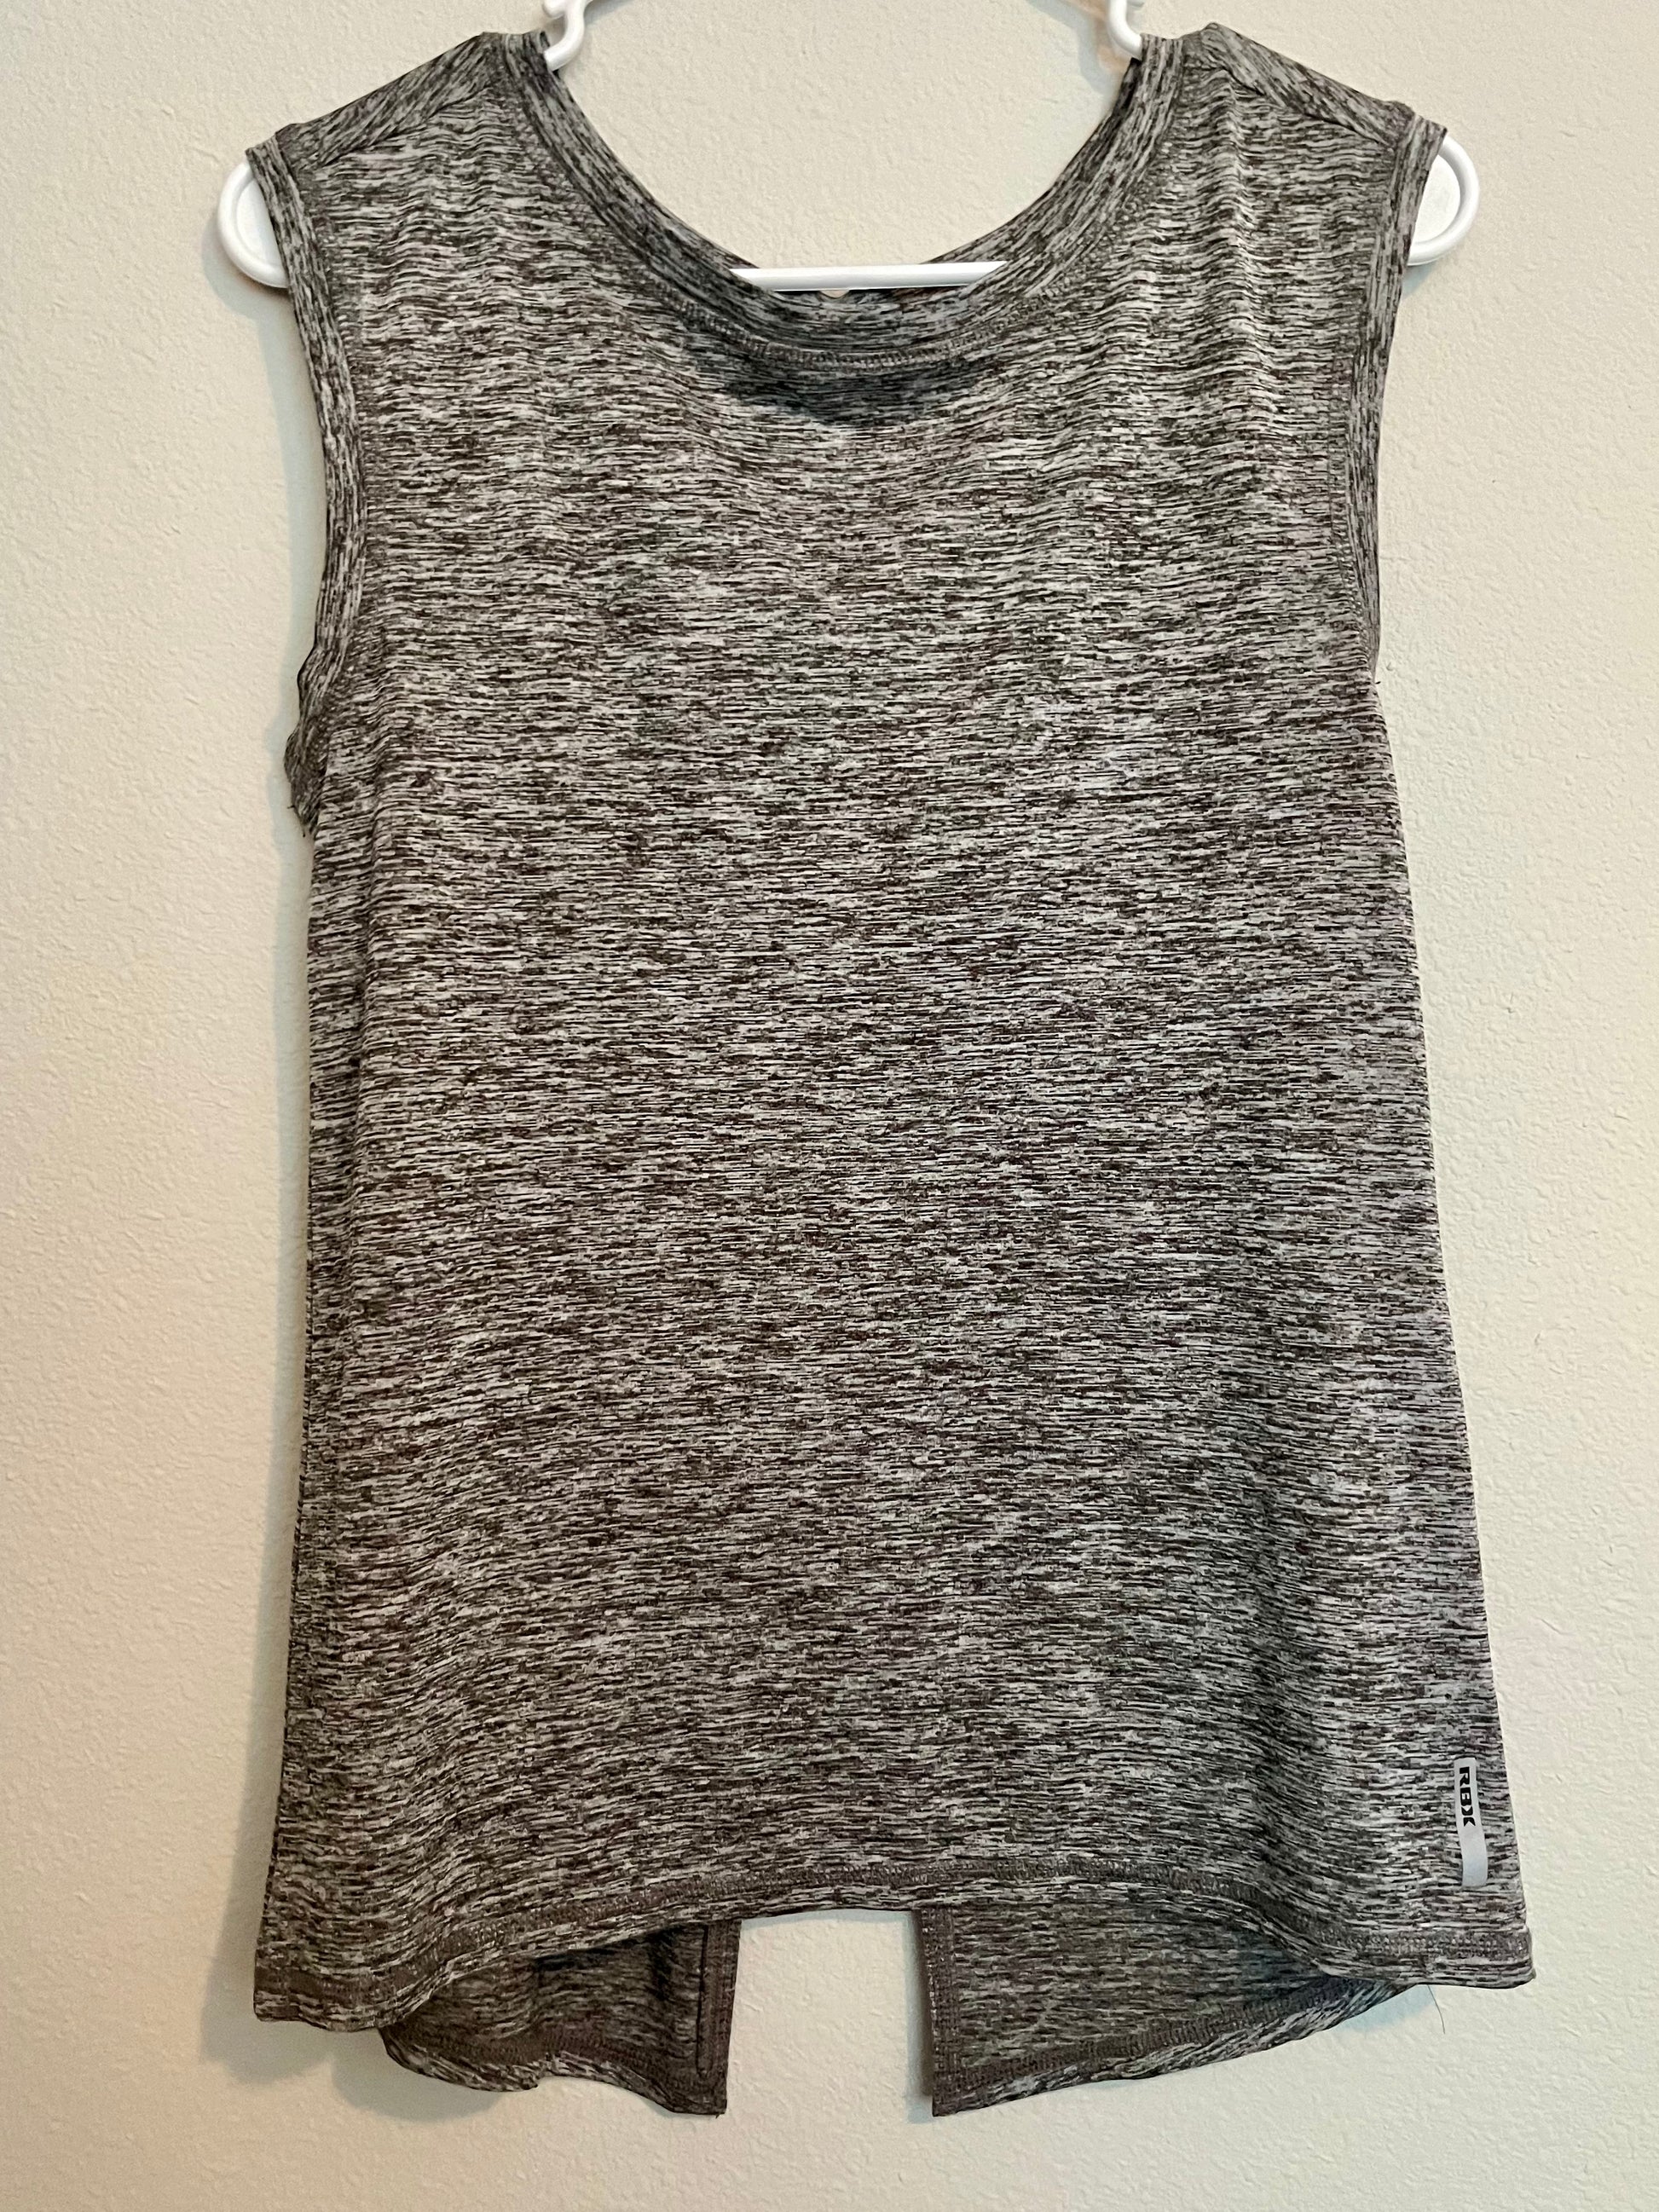 RBX Sleeveless Athletic Top, Size Medium - Tales from the Tangle